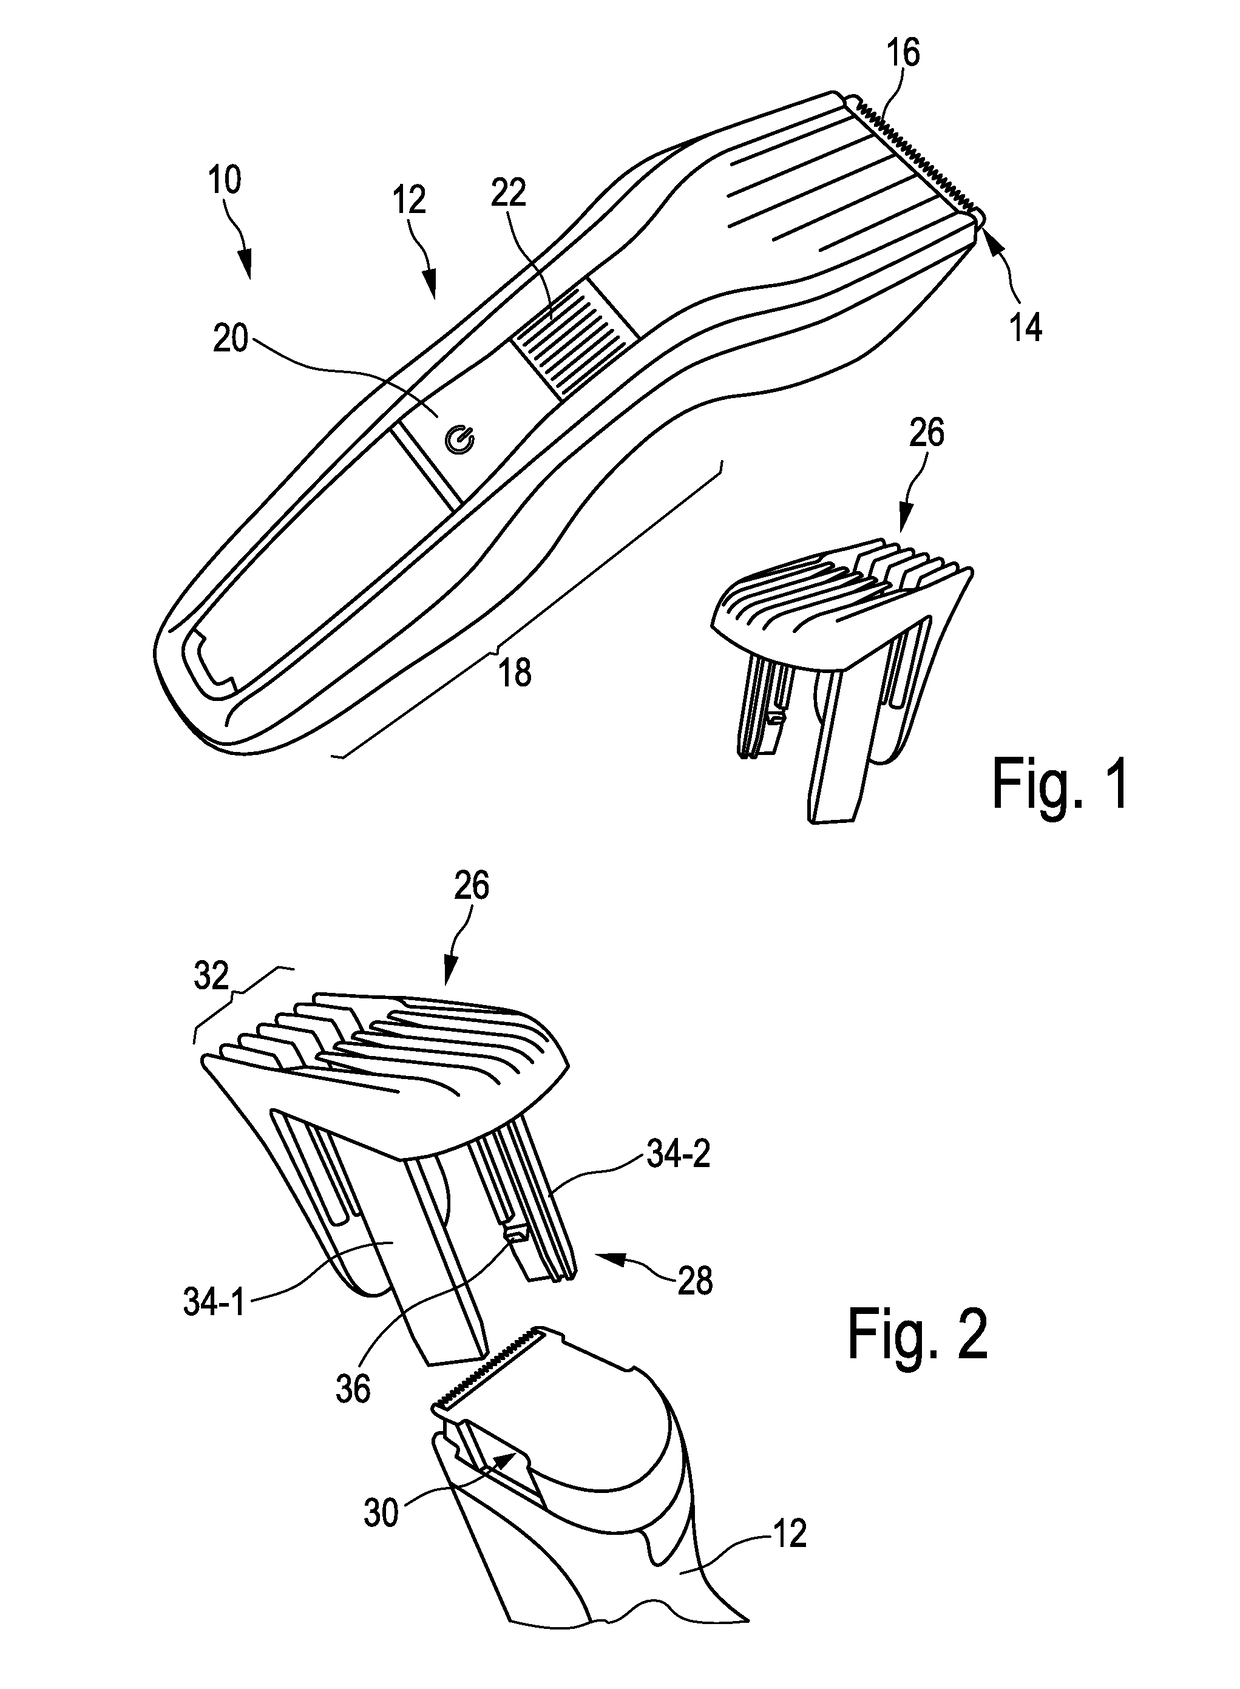 Adjustable spacing comb, adjustment drive and hair cutting appliance